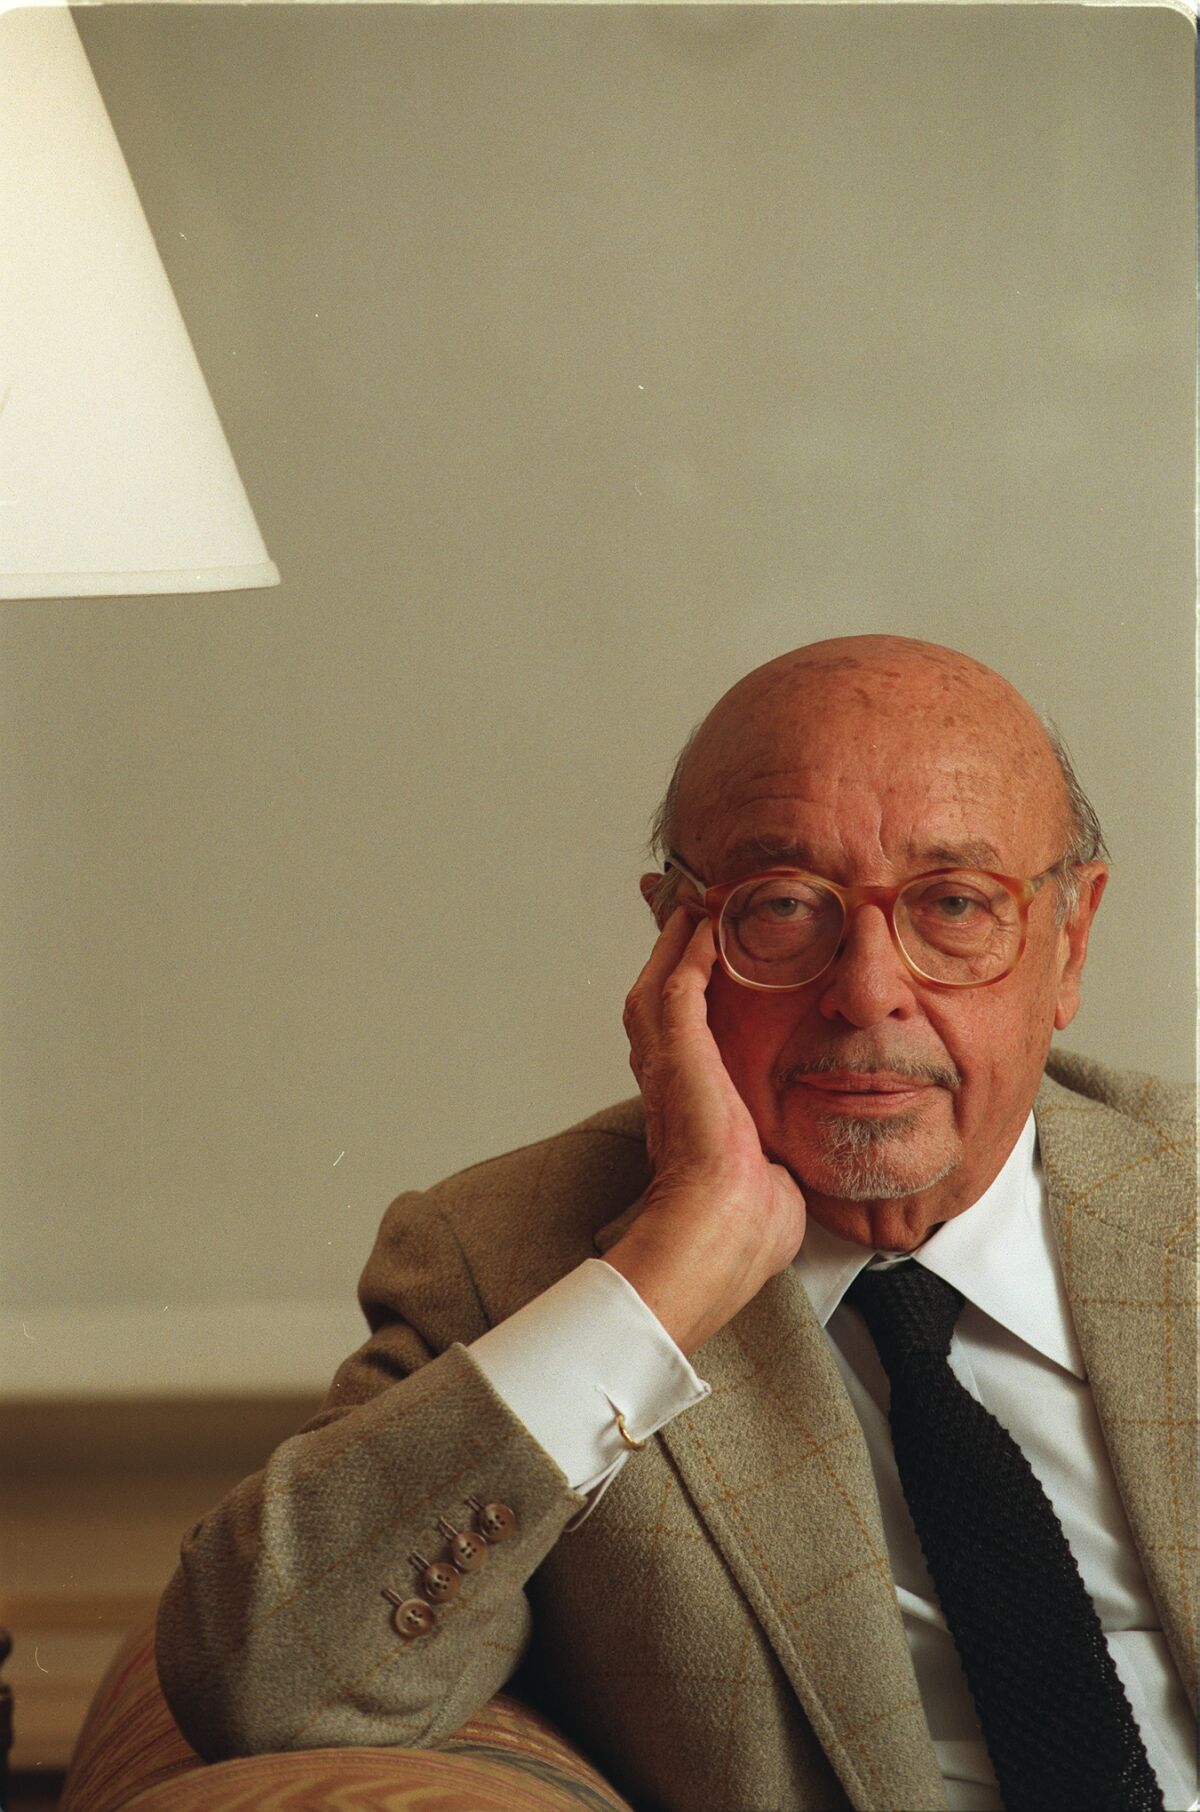 Man wearing a suit jacket and brown round glasses sits on a chair with his right hand in front of his face